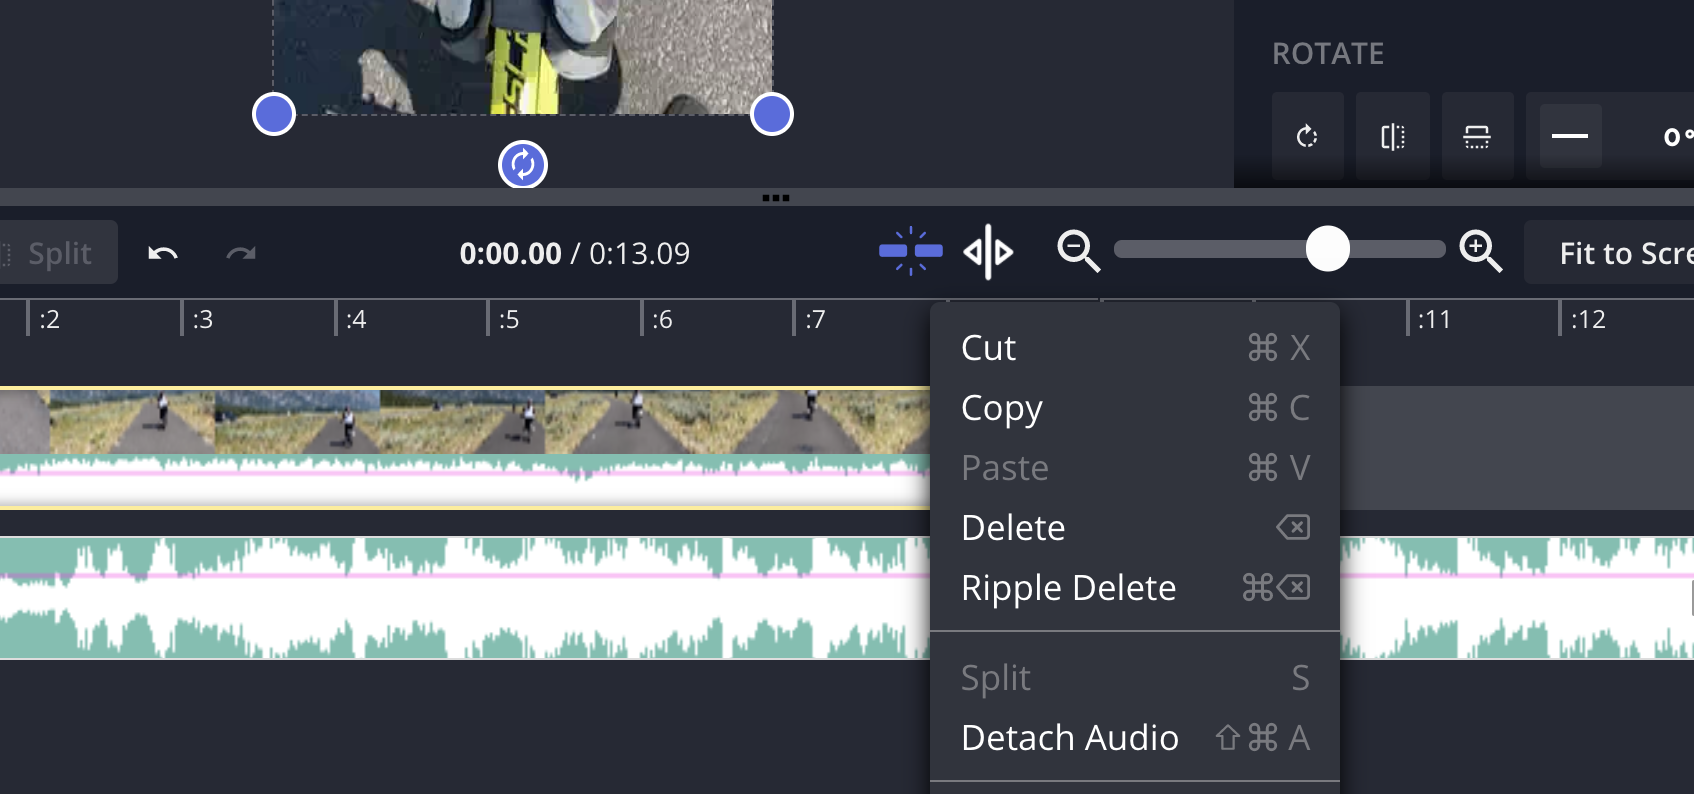 Detach audio from video file